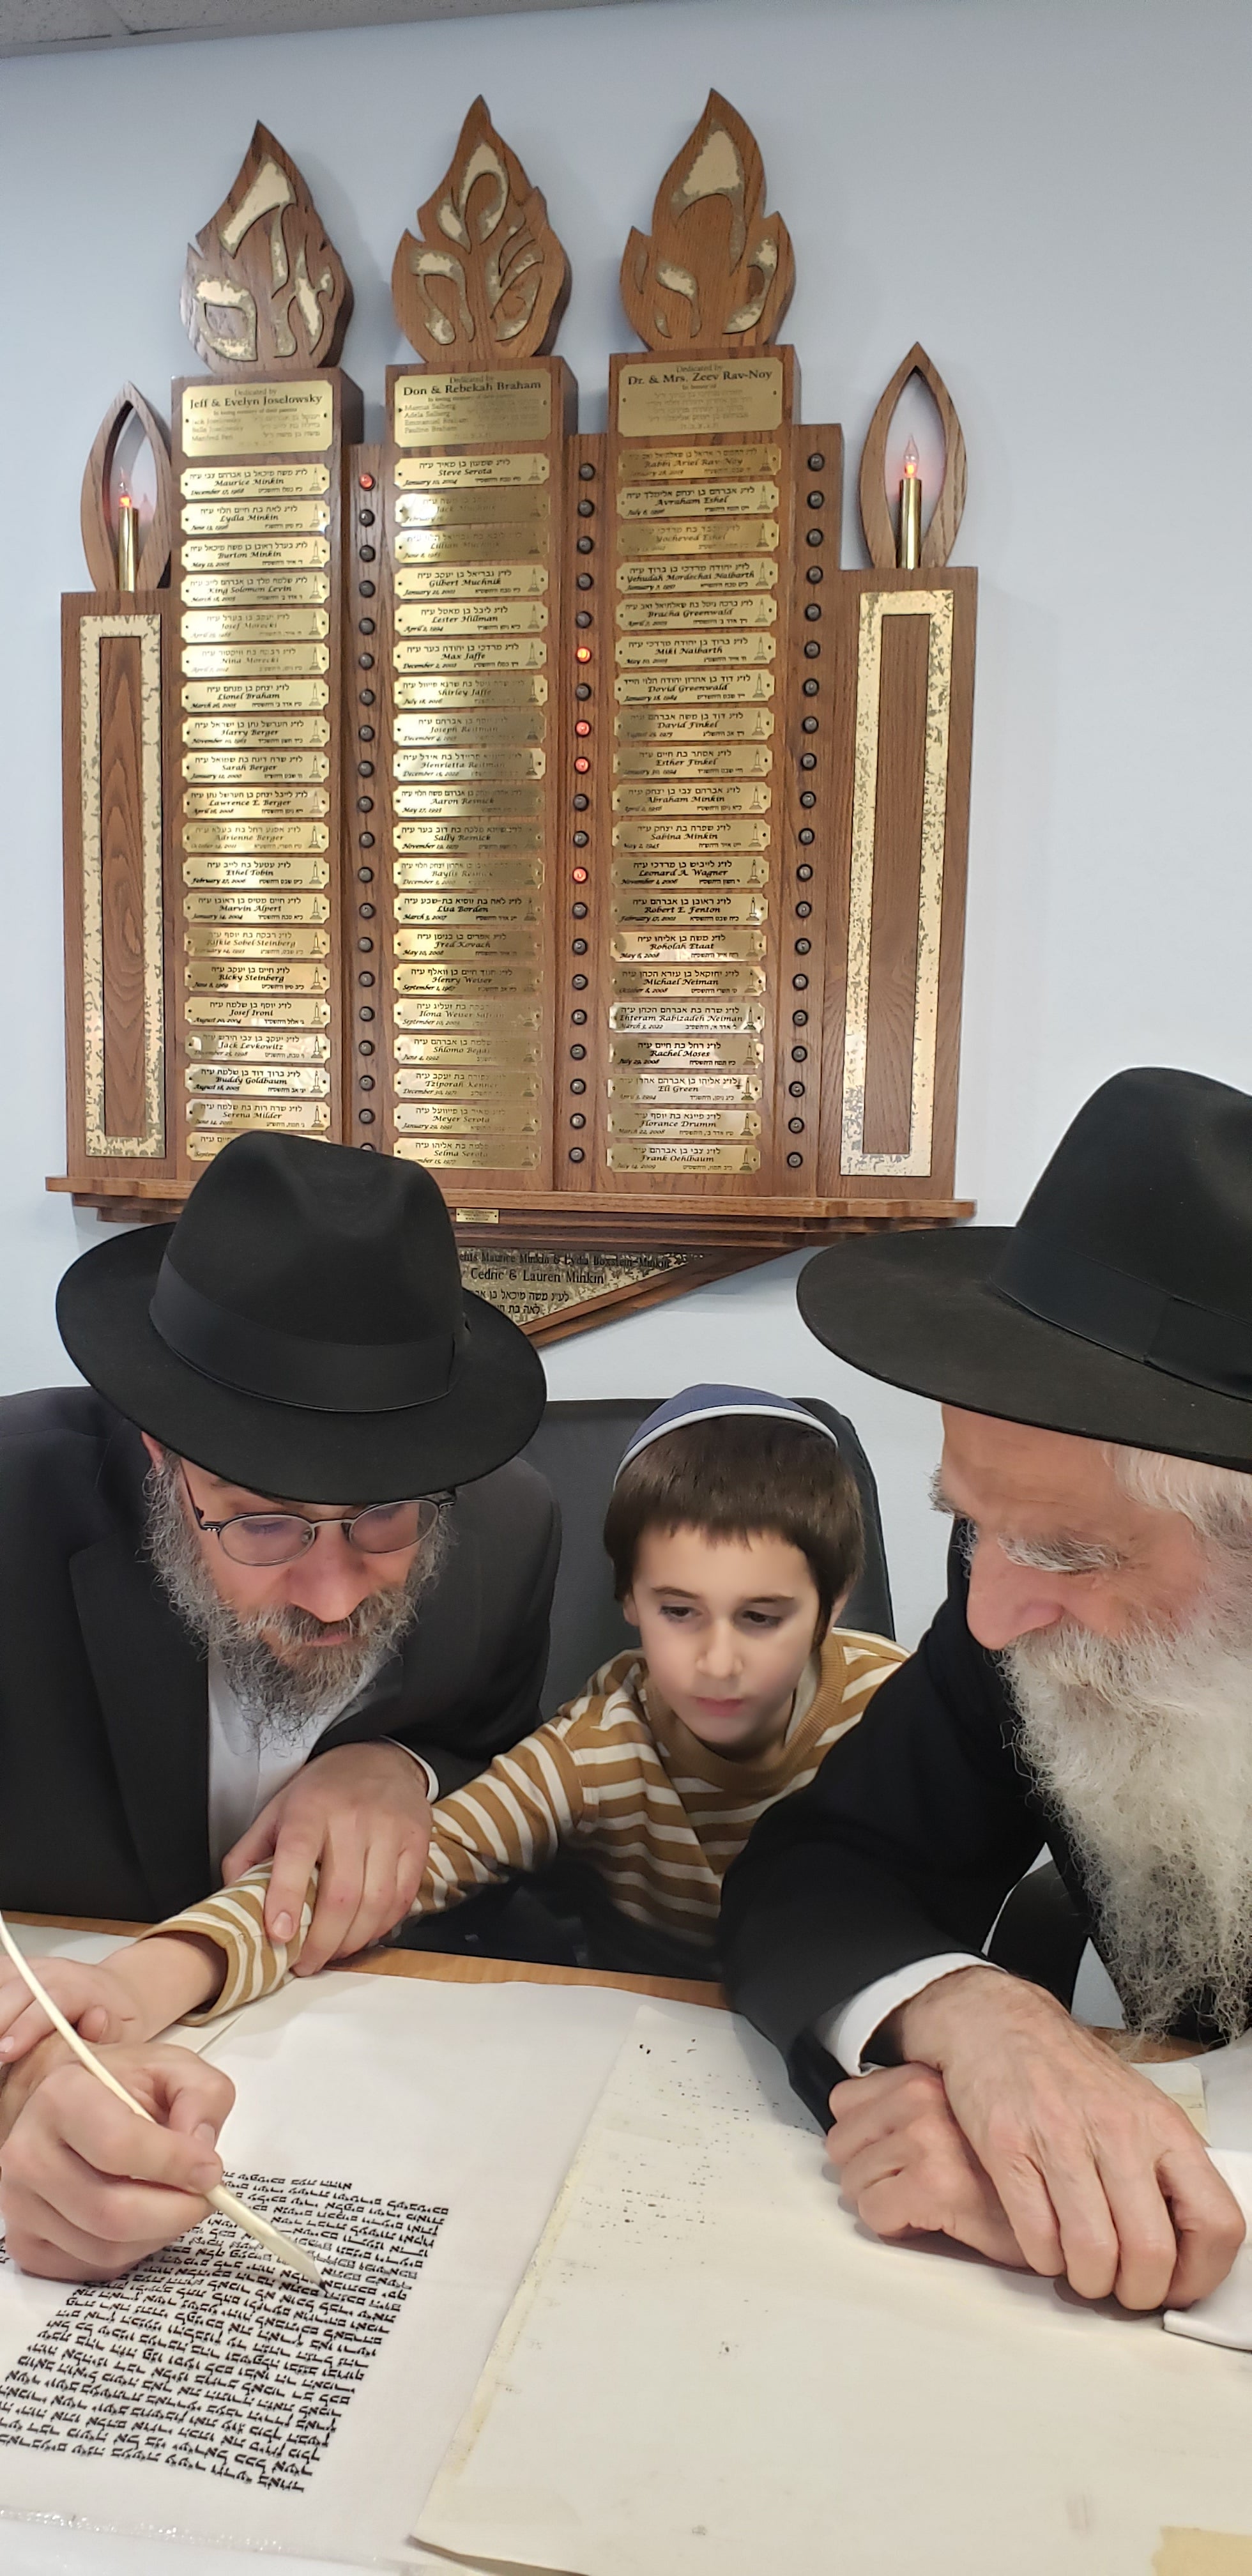 Load video: Sofer presenting Jewish calligraphy and a love for Judaism